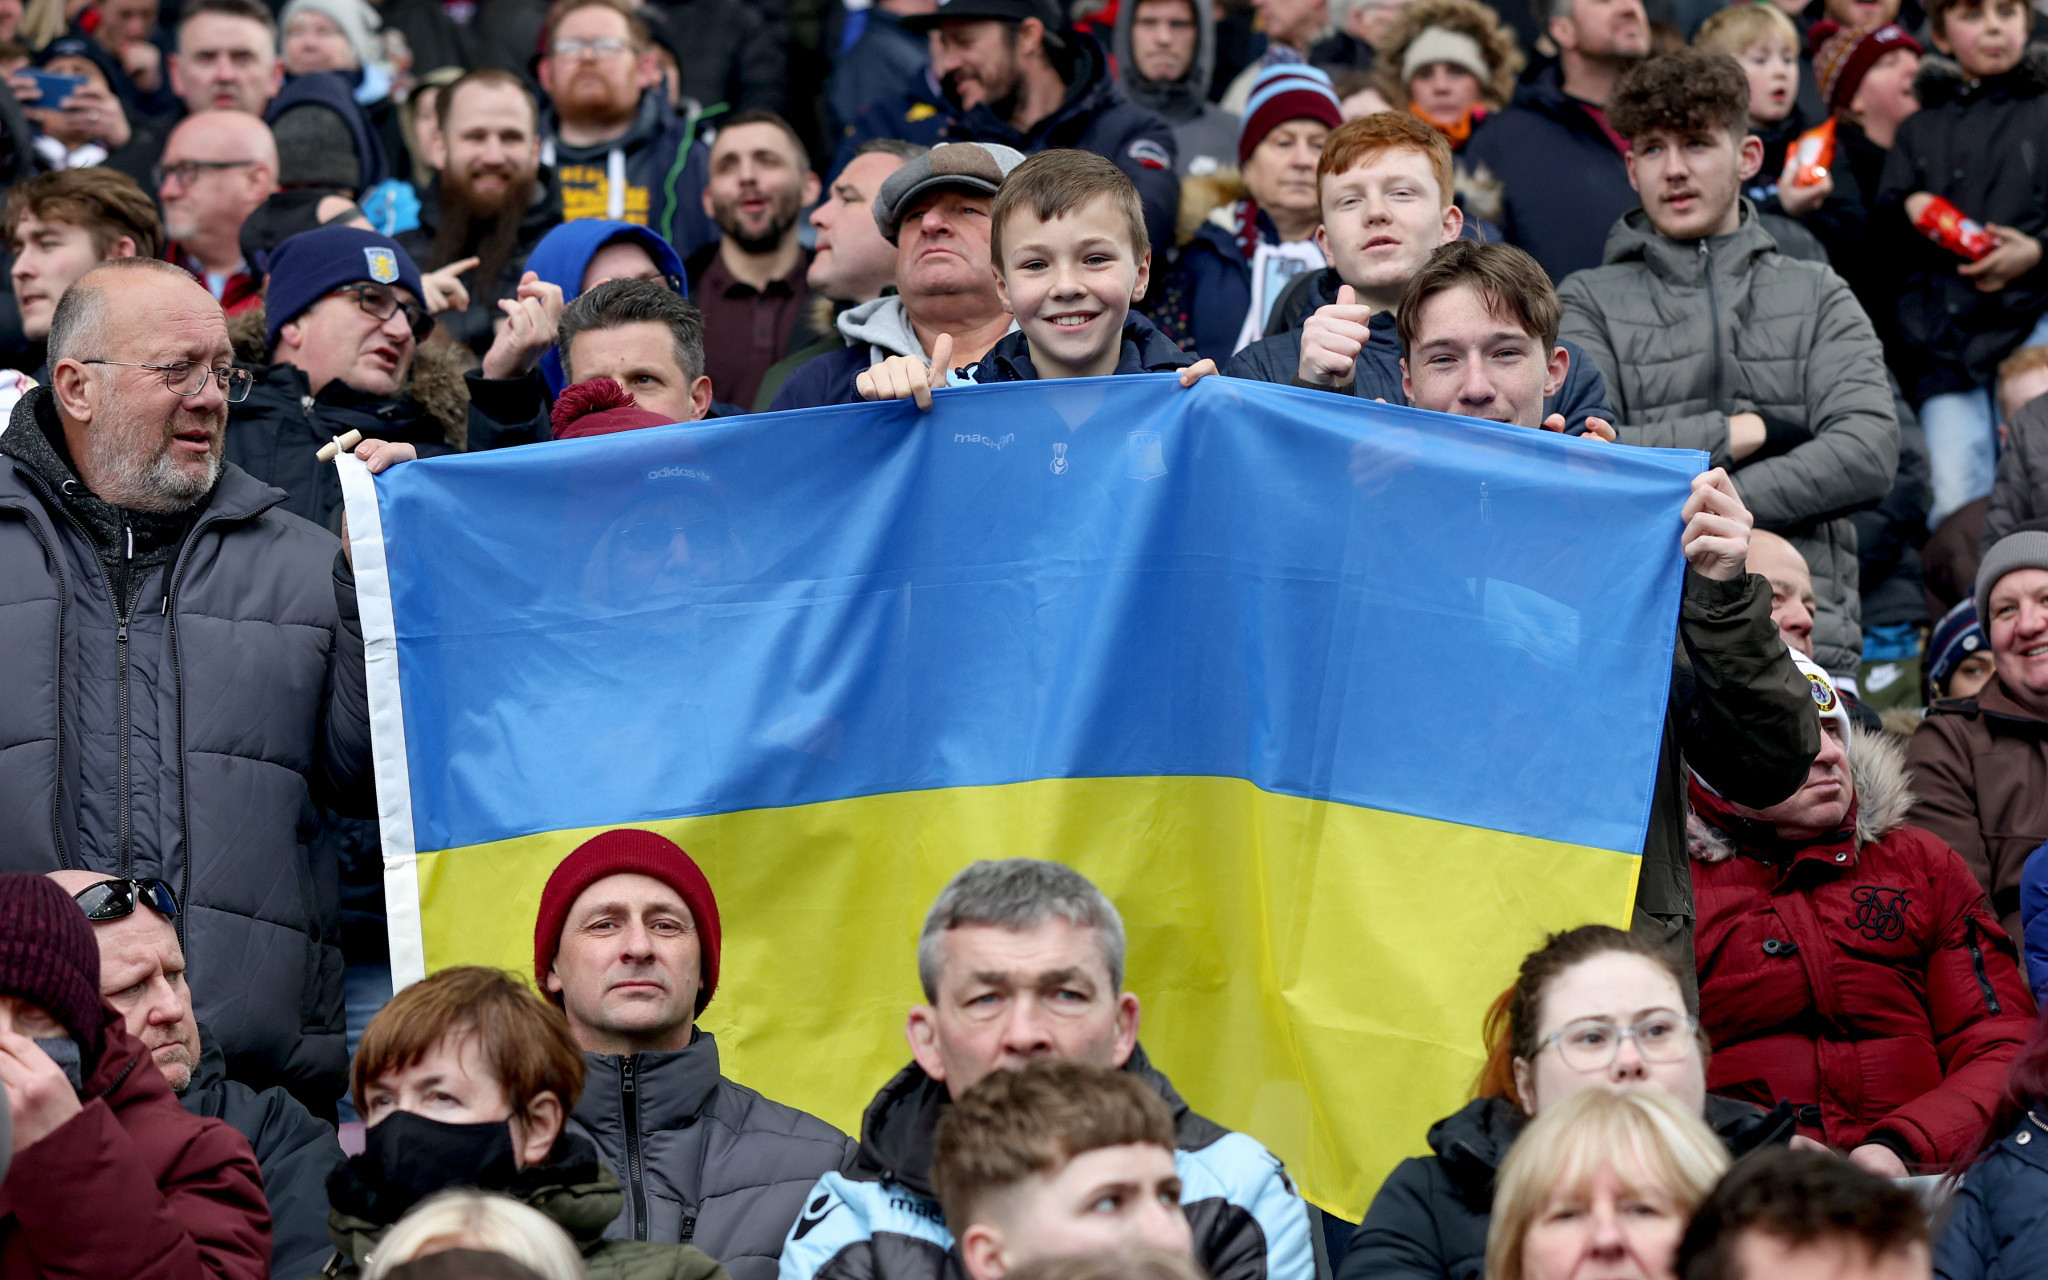 Aston Villa fans hold up a Ukraine flag before their side's match against Southampton ©Getty Images